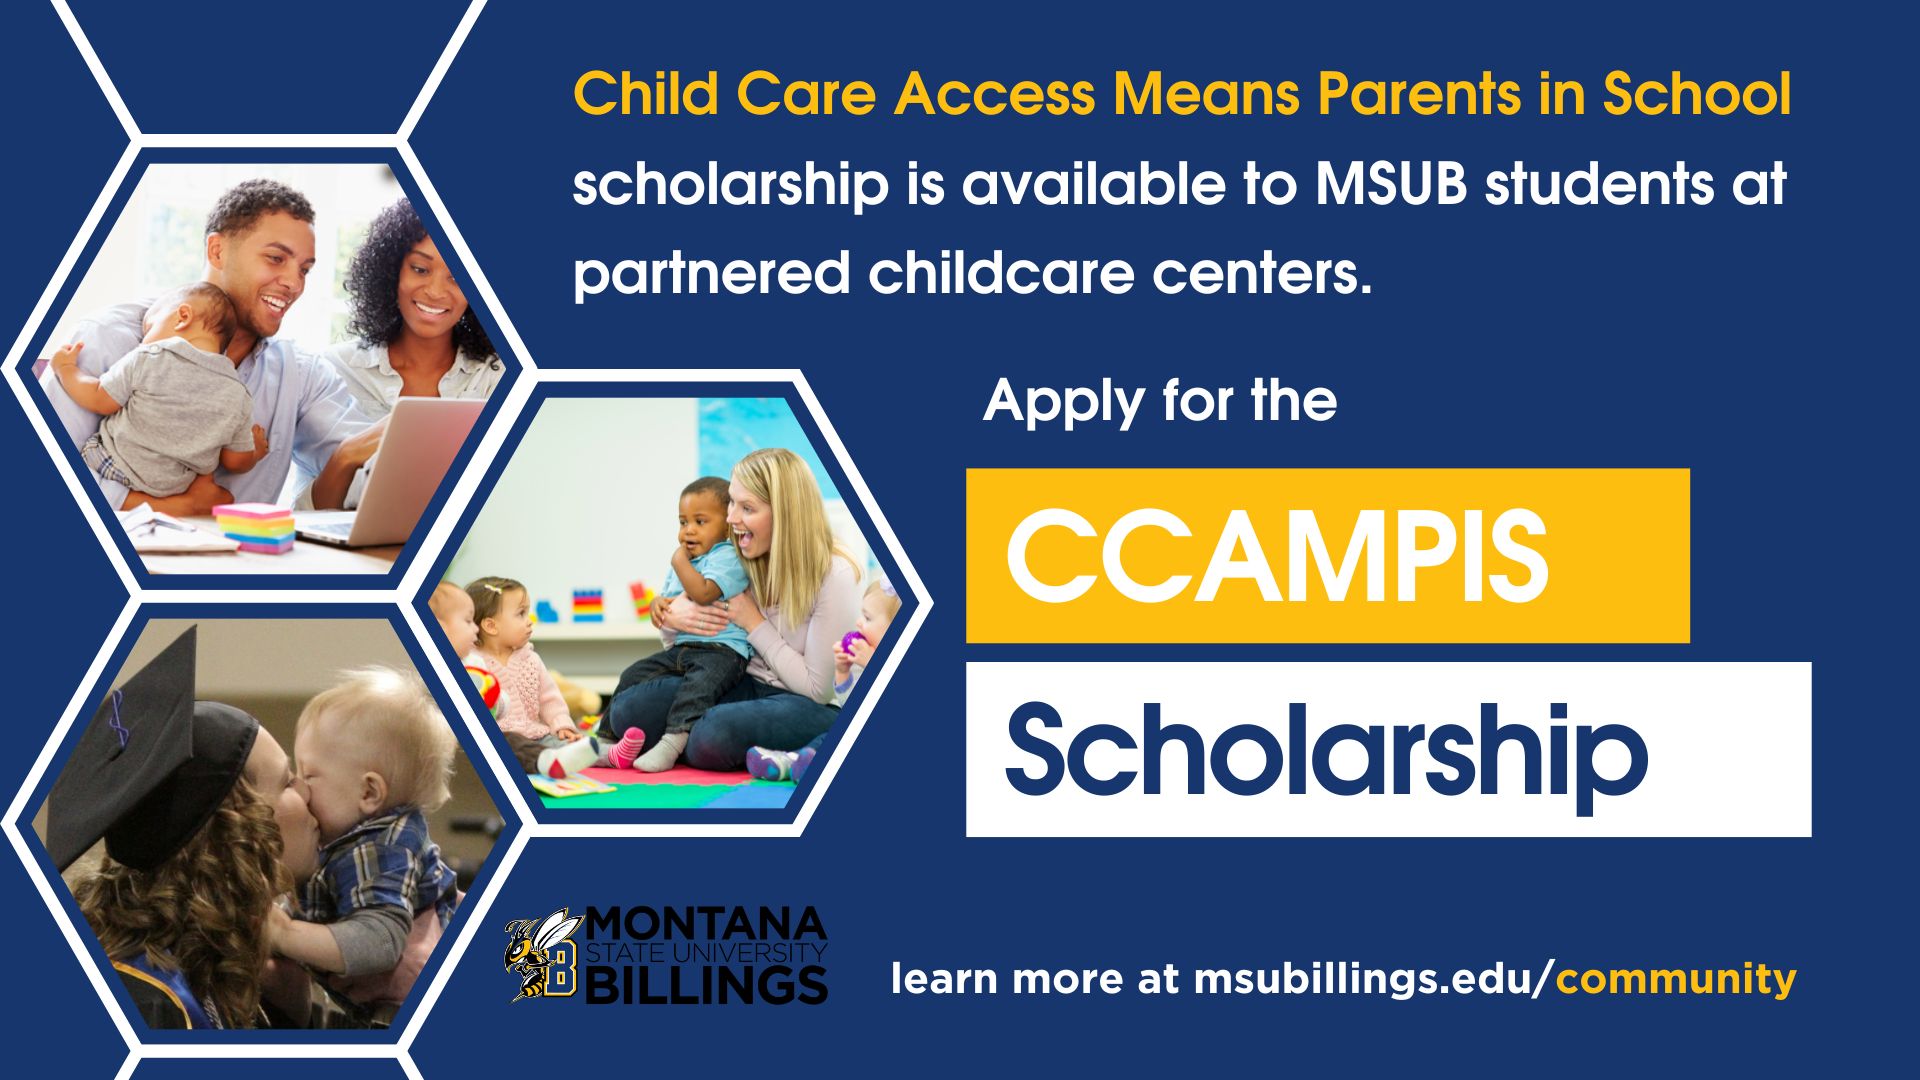 Apply for the CCAMPIS Scholarship. The Child Care Access Means Parents in School (CCAMPIS) scholarship is available to MSU Billings students at partnered childcare centers.